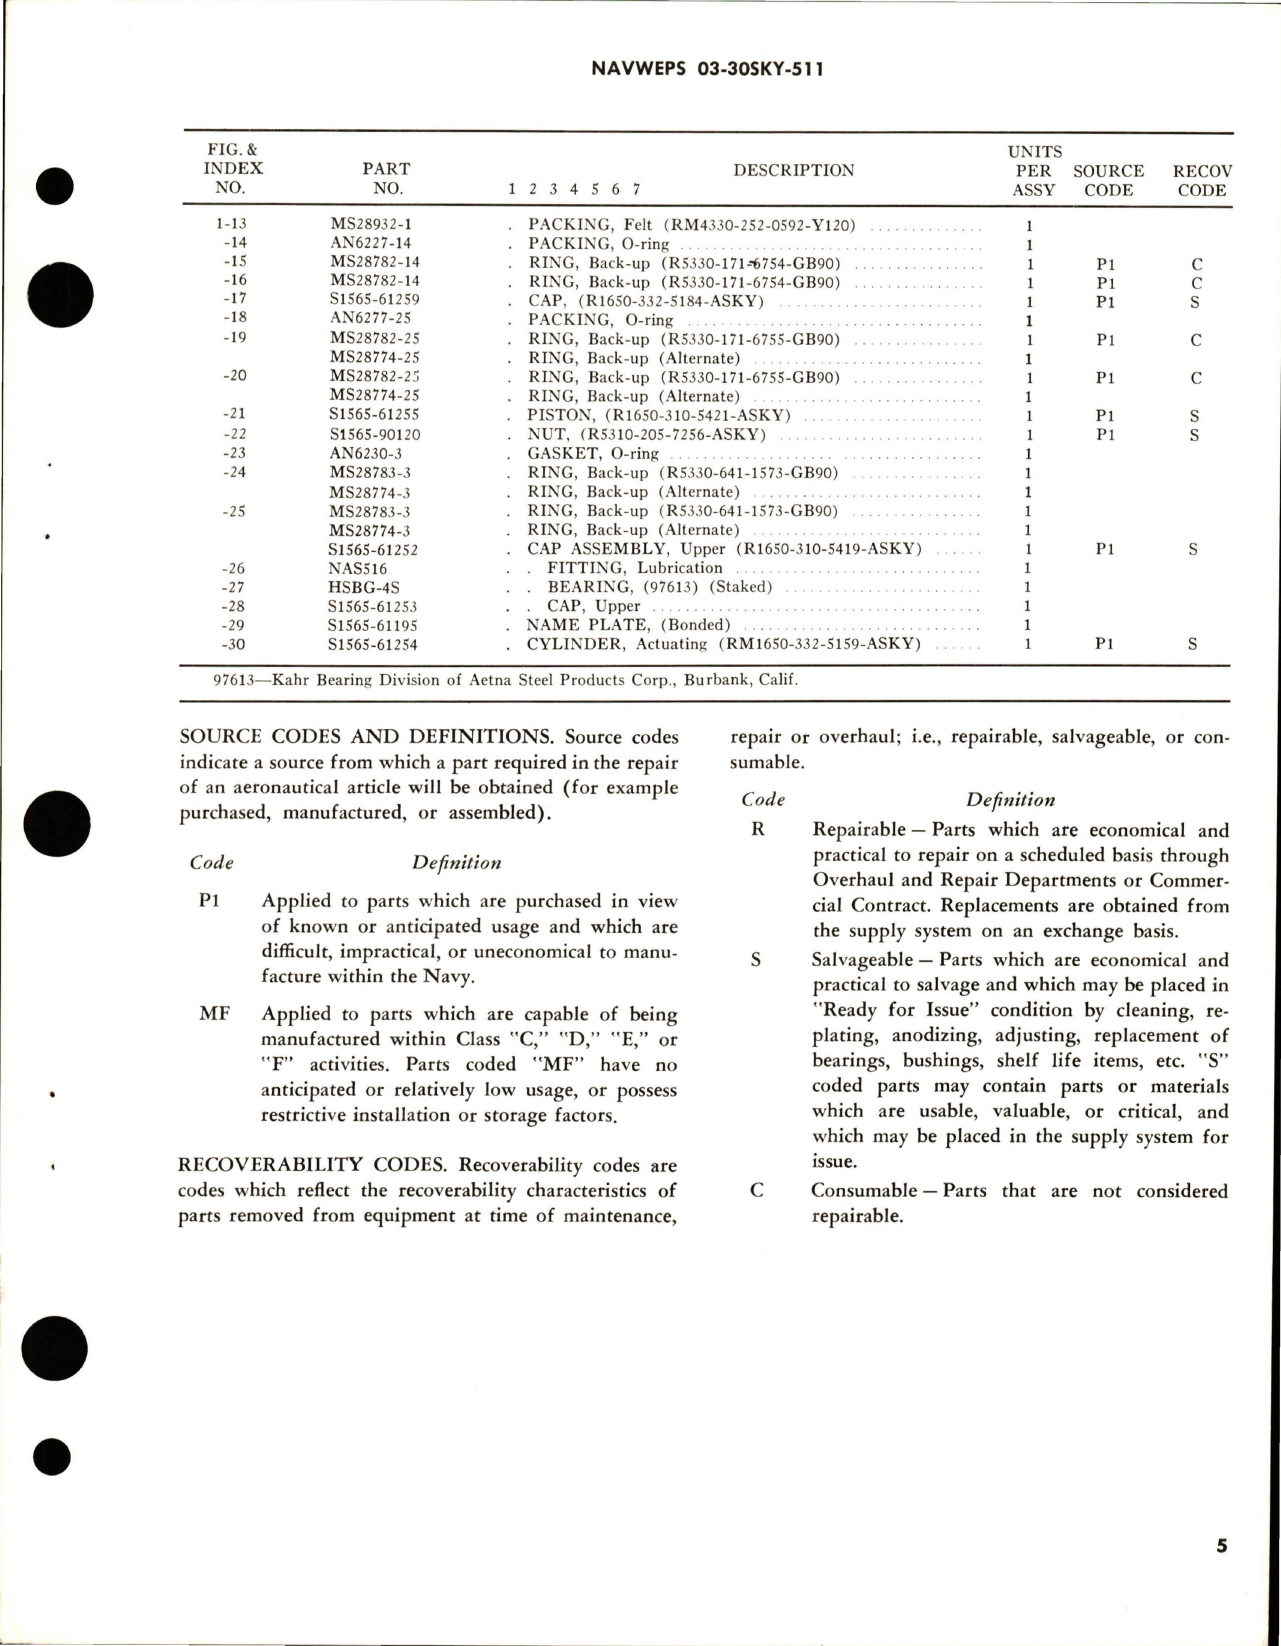 Sample page 5 from AirCorps Library document: Overhaul Instructions with Parts Breakdown for Actuating Cylinder Assembly - S1565-61251, S15656-61251-1, and S1565-61251-2